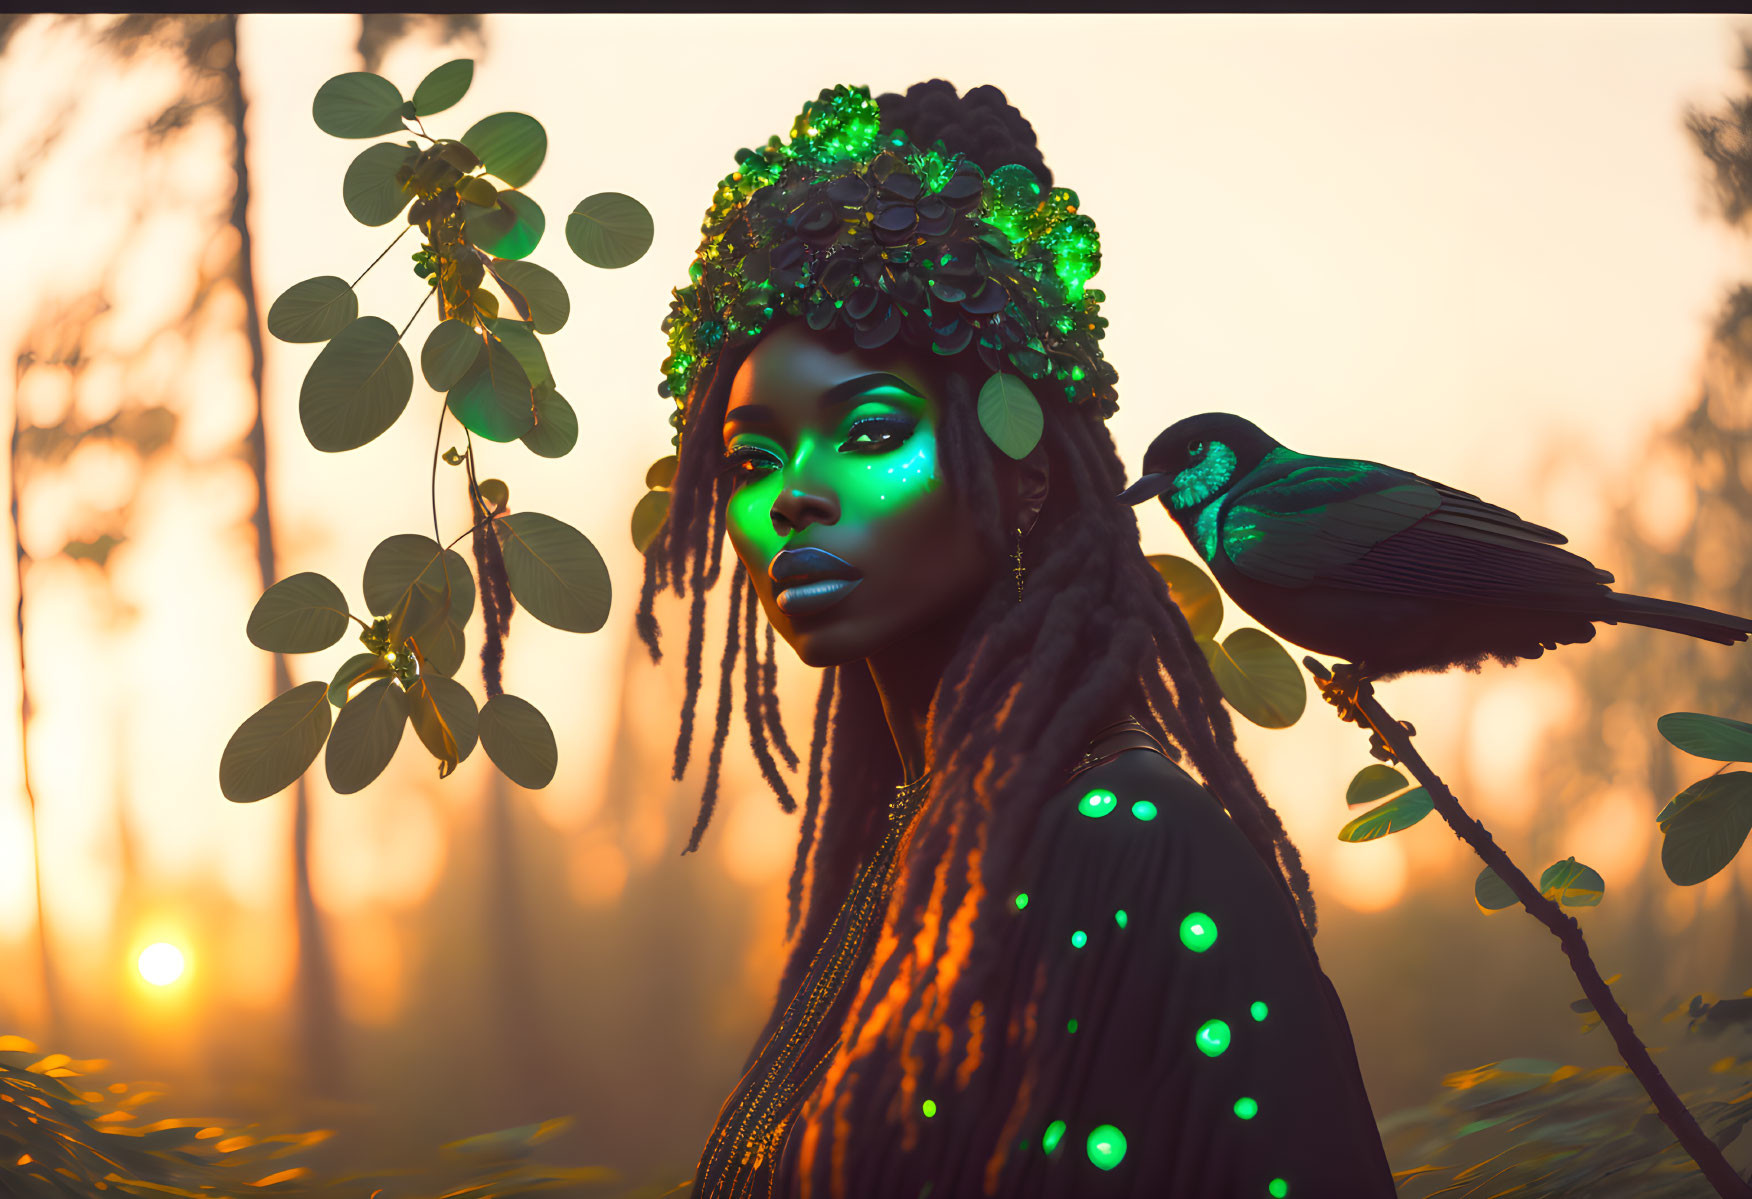 Portrait of Woman with Green Crown and Black Bird in Mystical Forest at Sunset